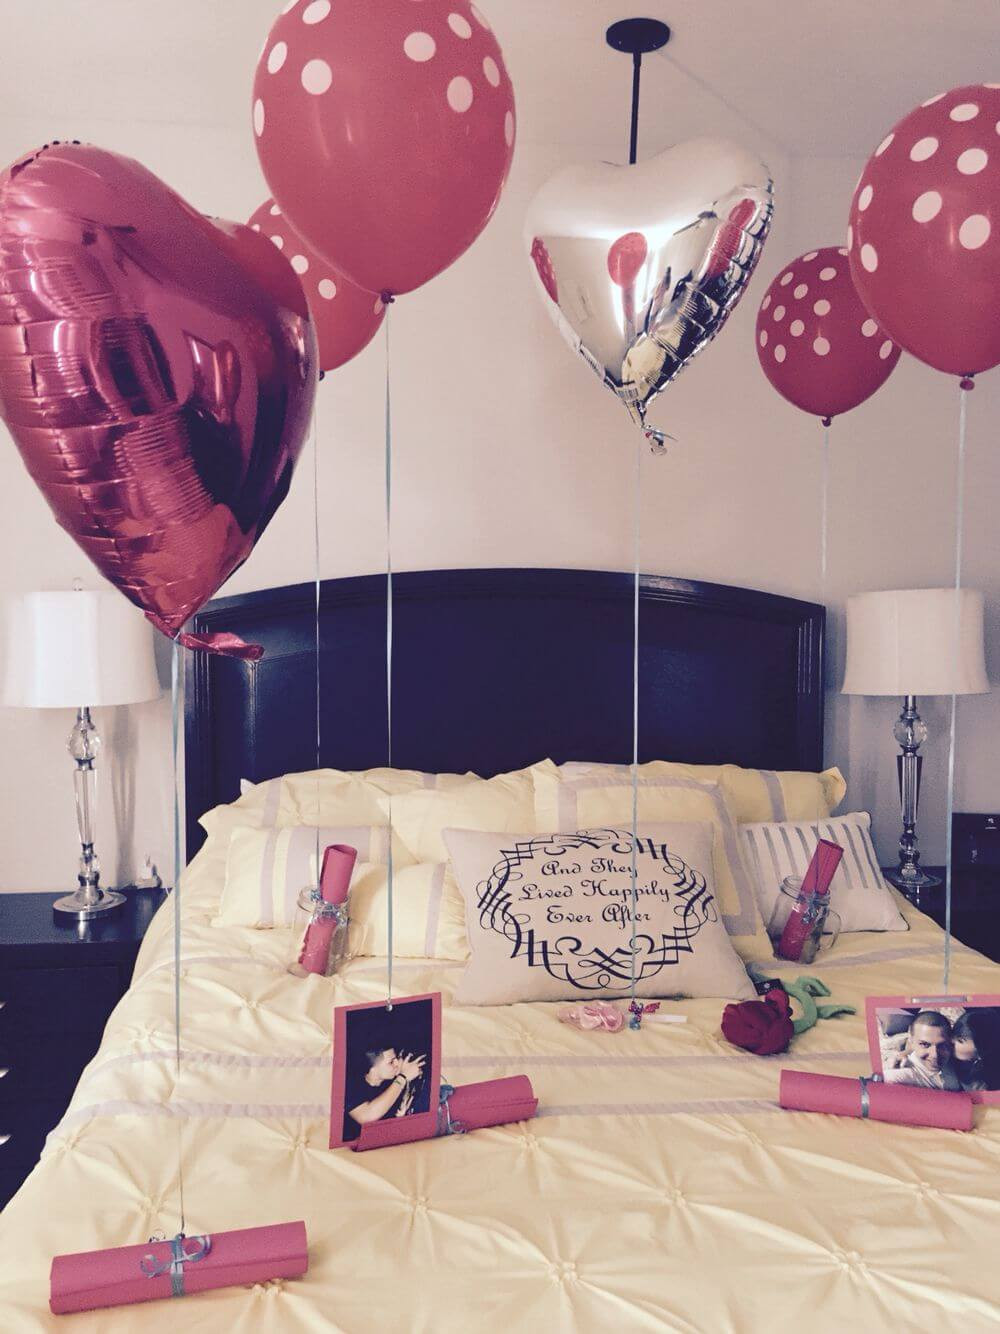 Valentines Day Ideas For Husband
 Balloons perfect idea for Valentine Details for your